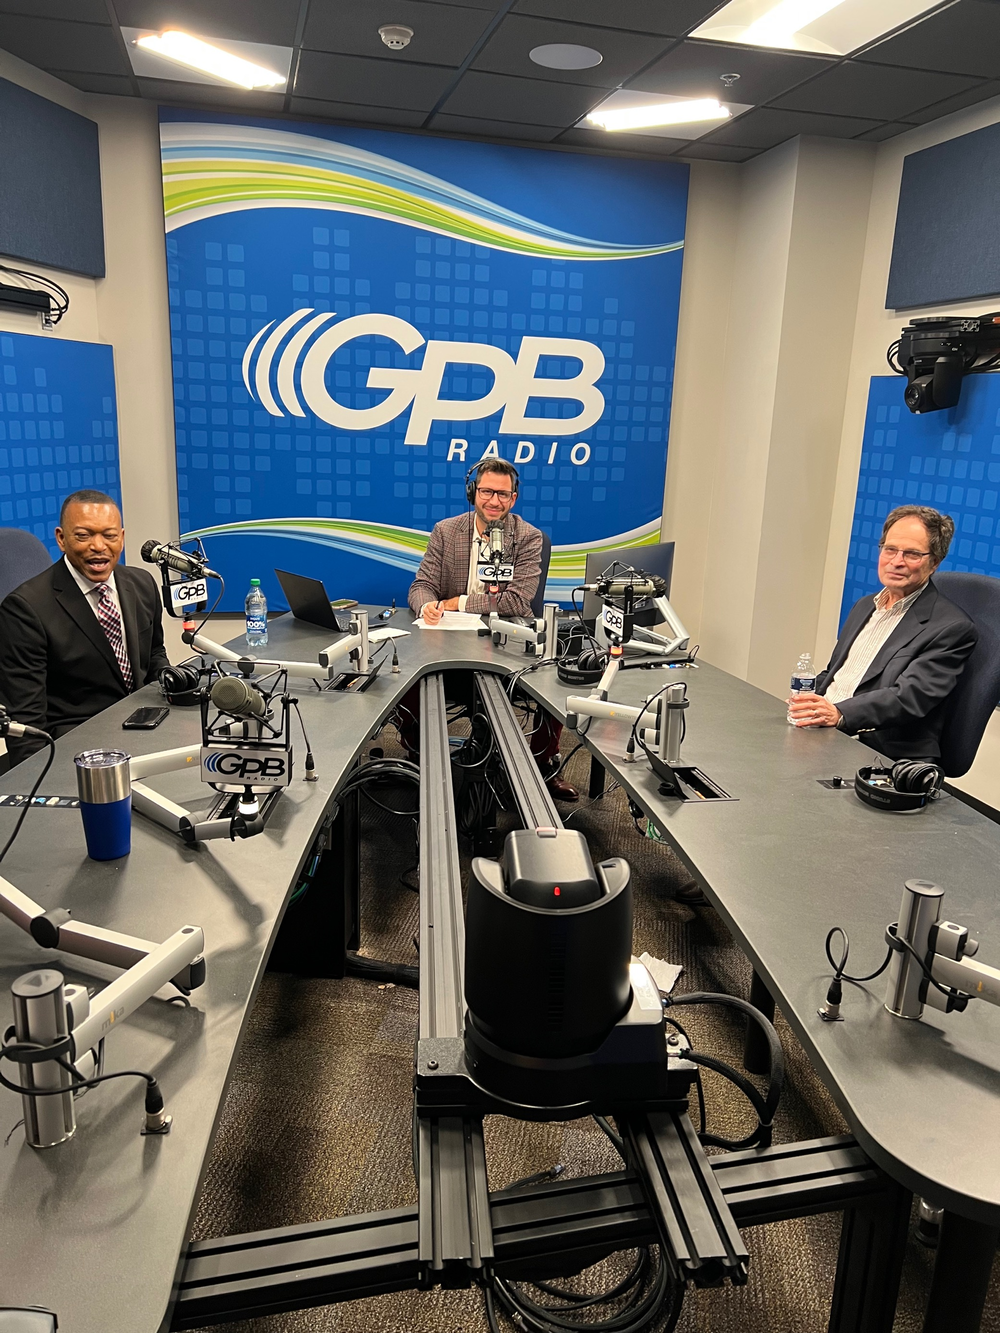 Peter Biello and guests in the GPB News talk studio